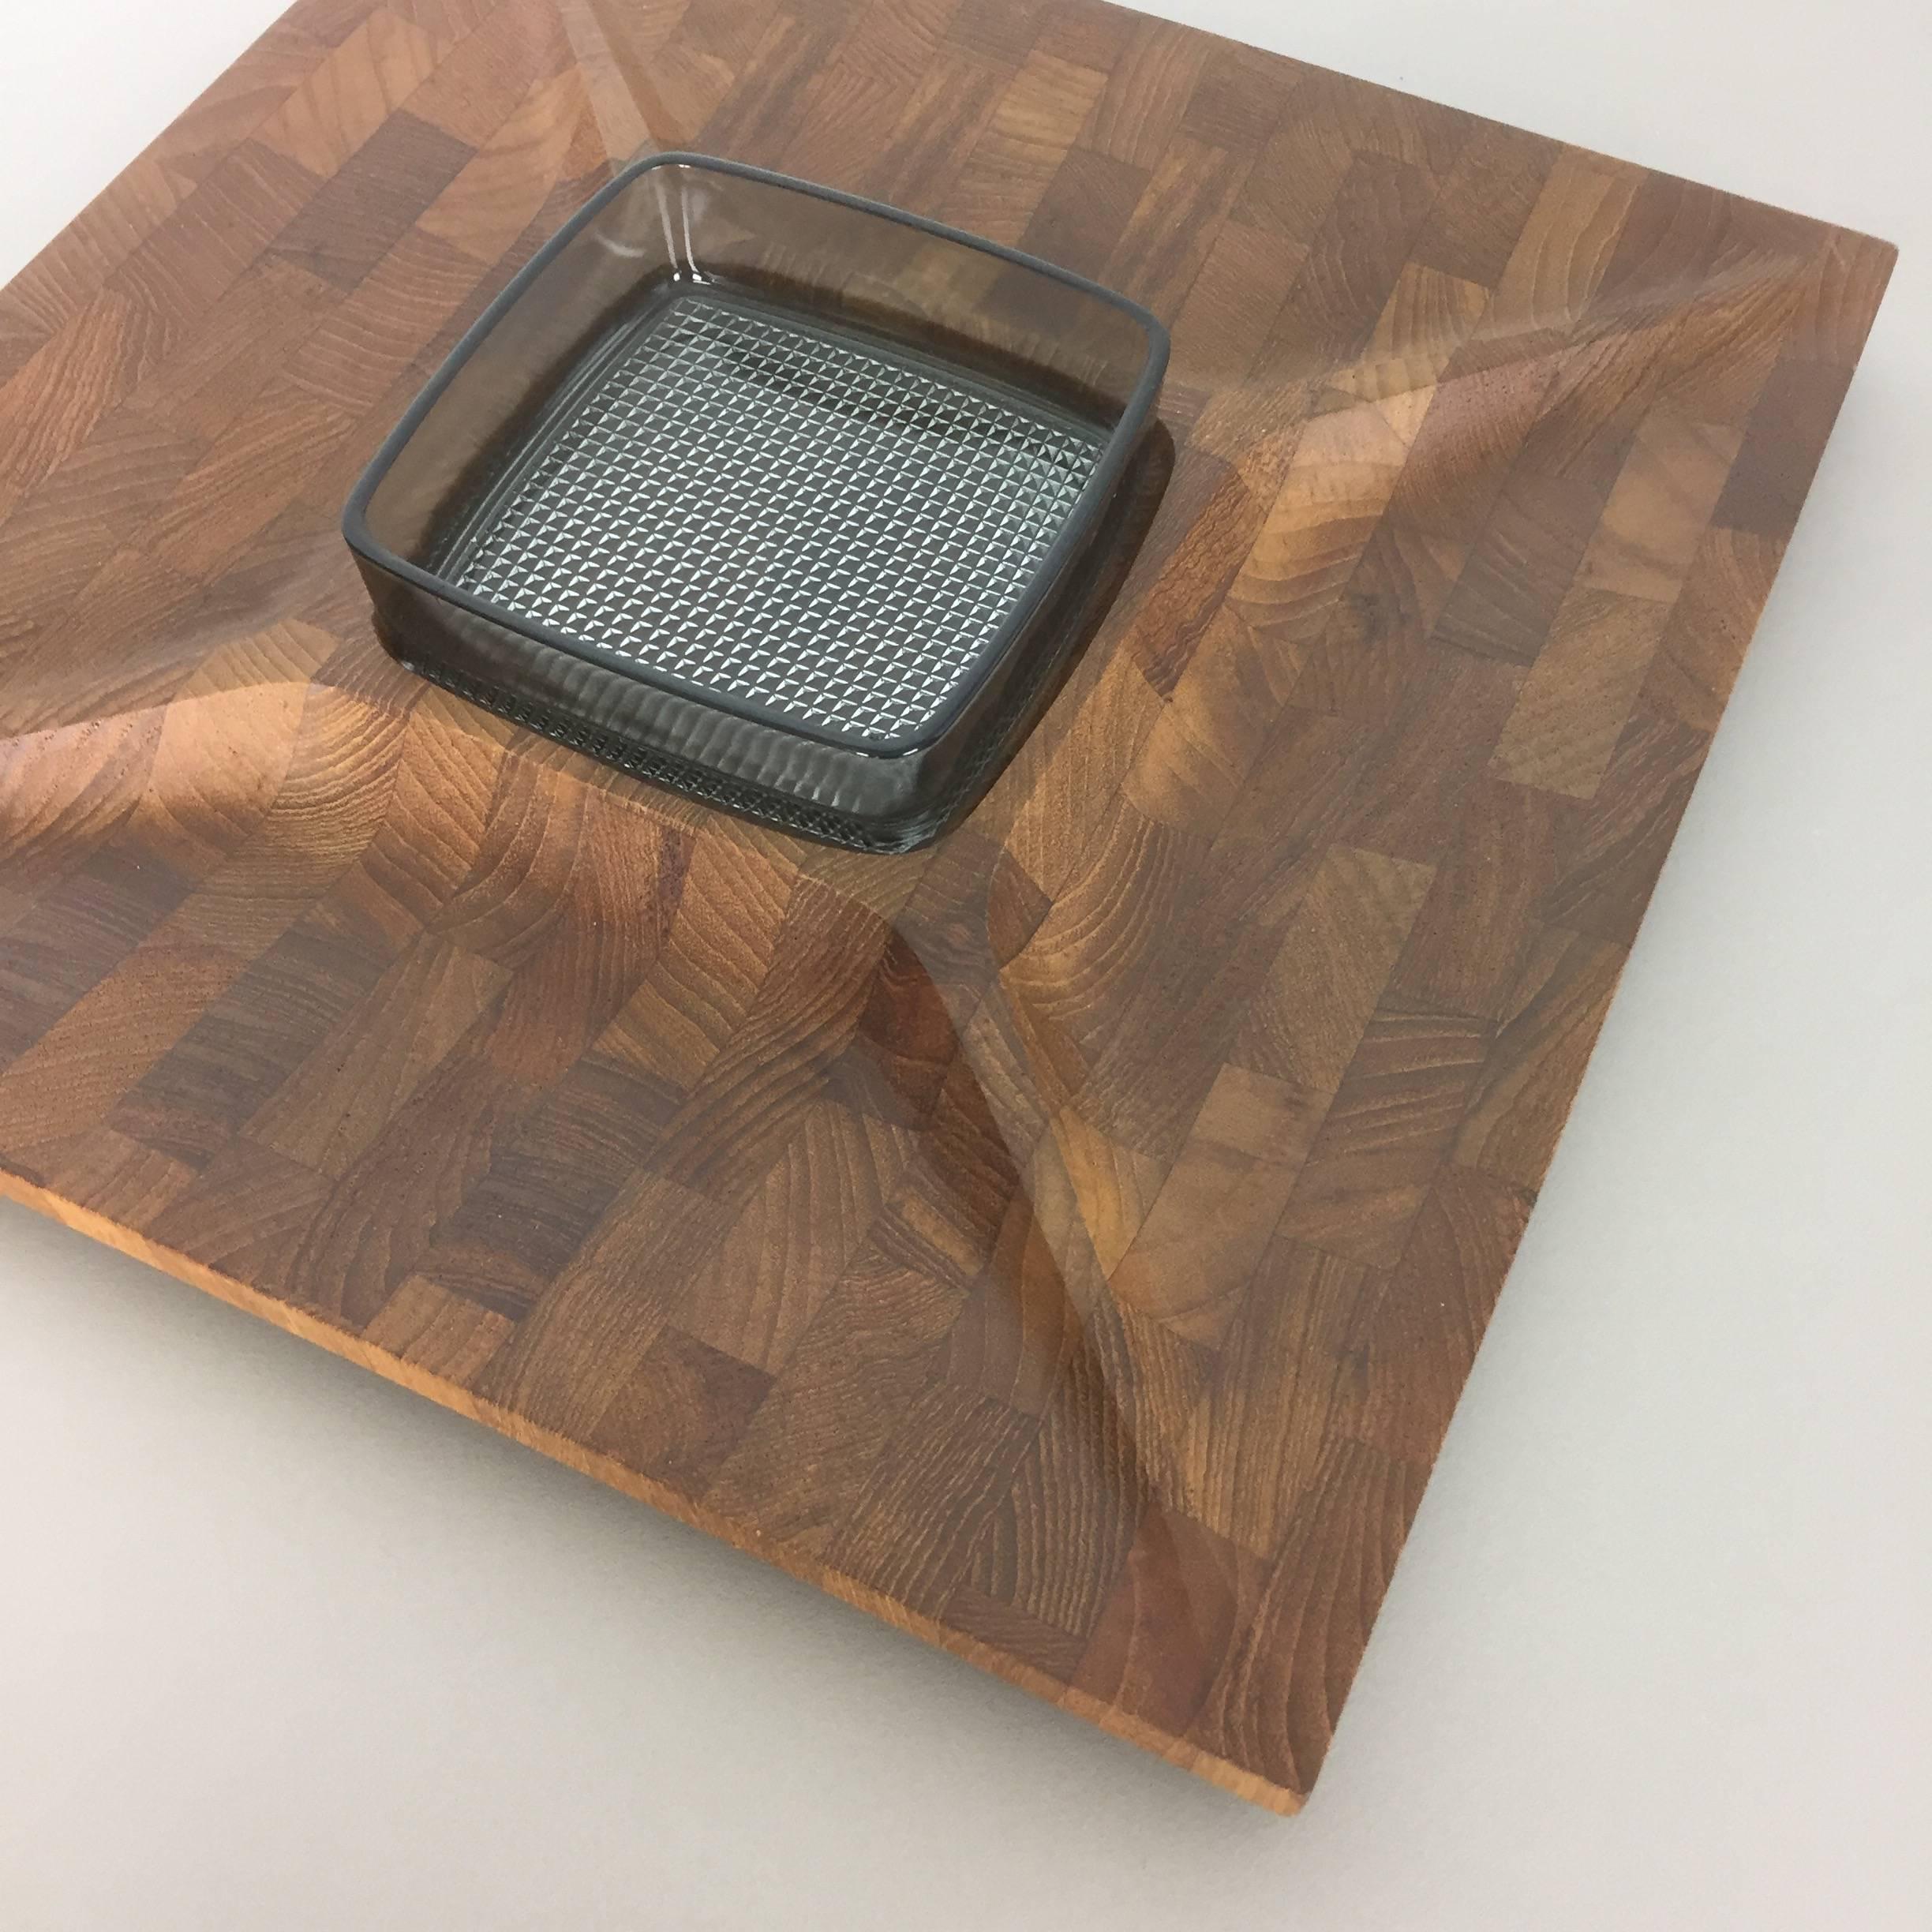 Glass Danish Shell Bowl in Solid Teak Wood, by Digsmed Made in Denmark, 1960s For Sale